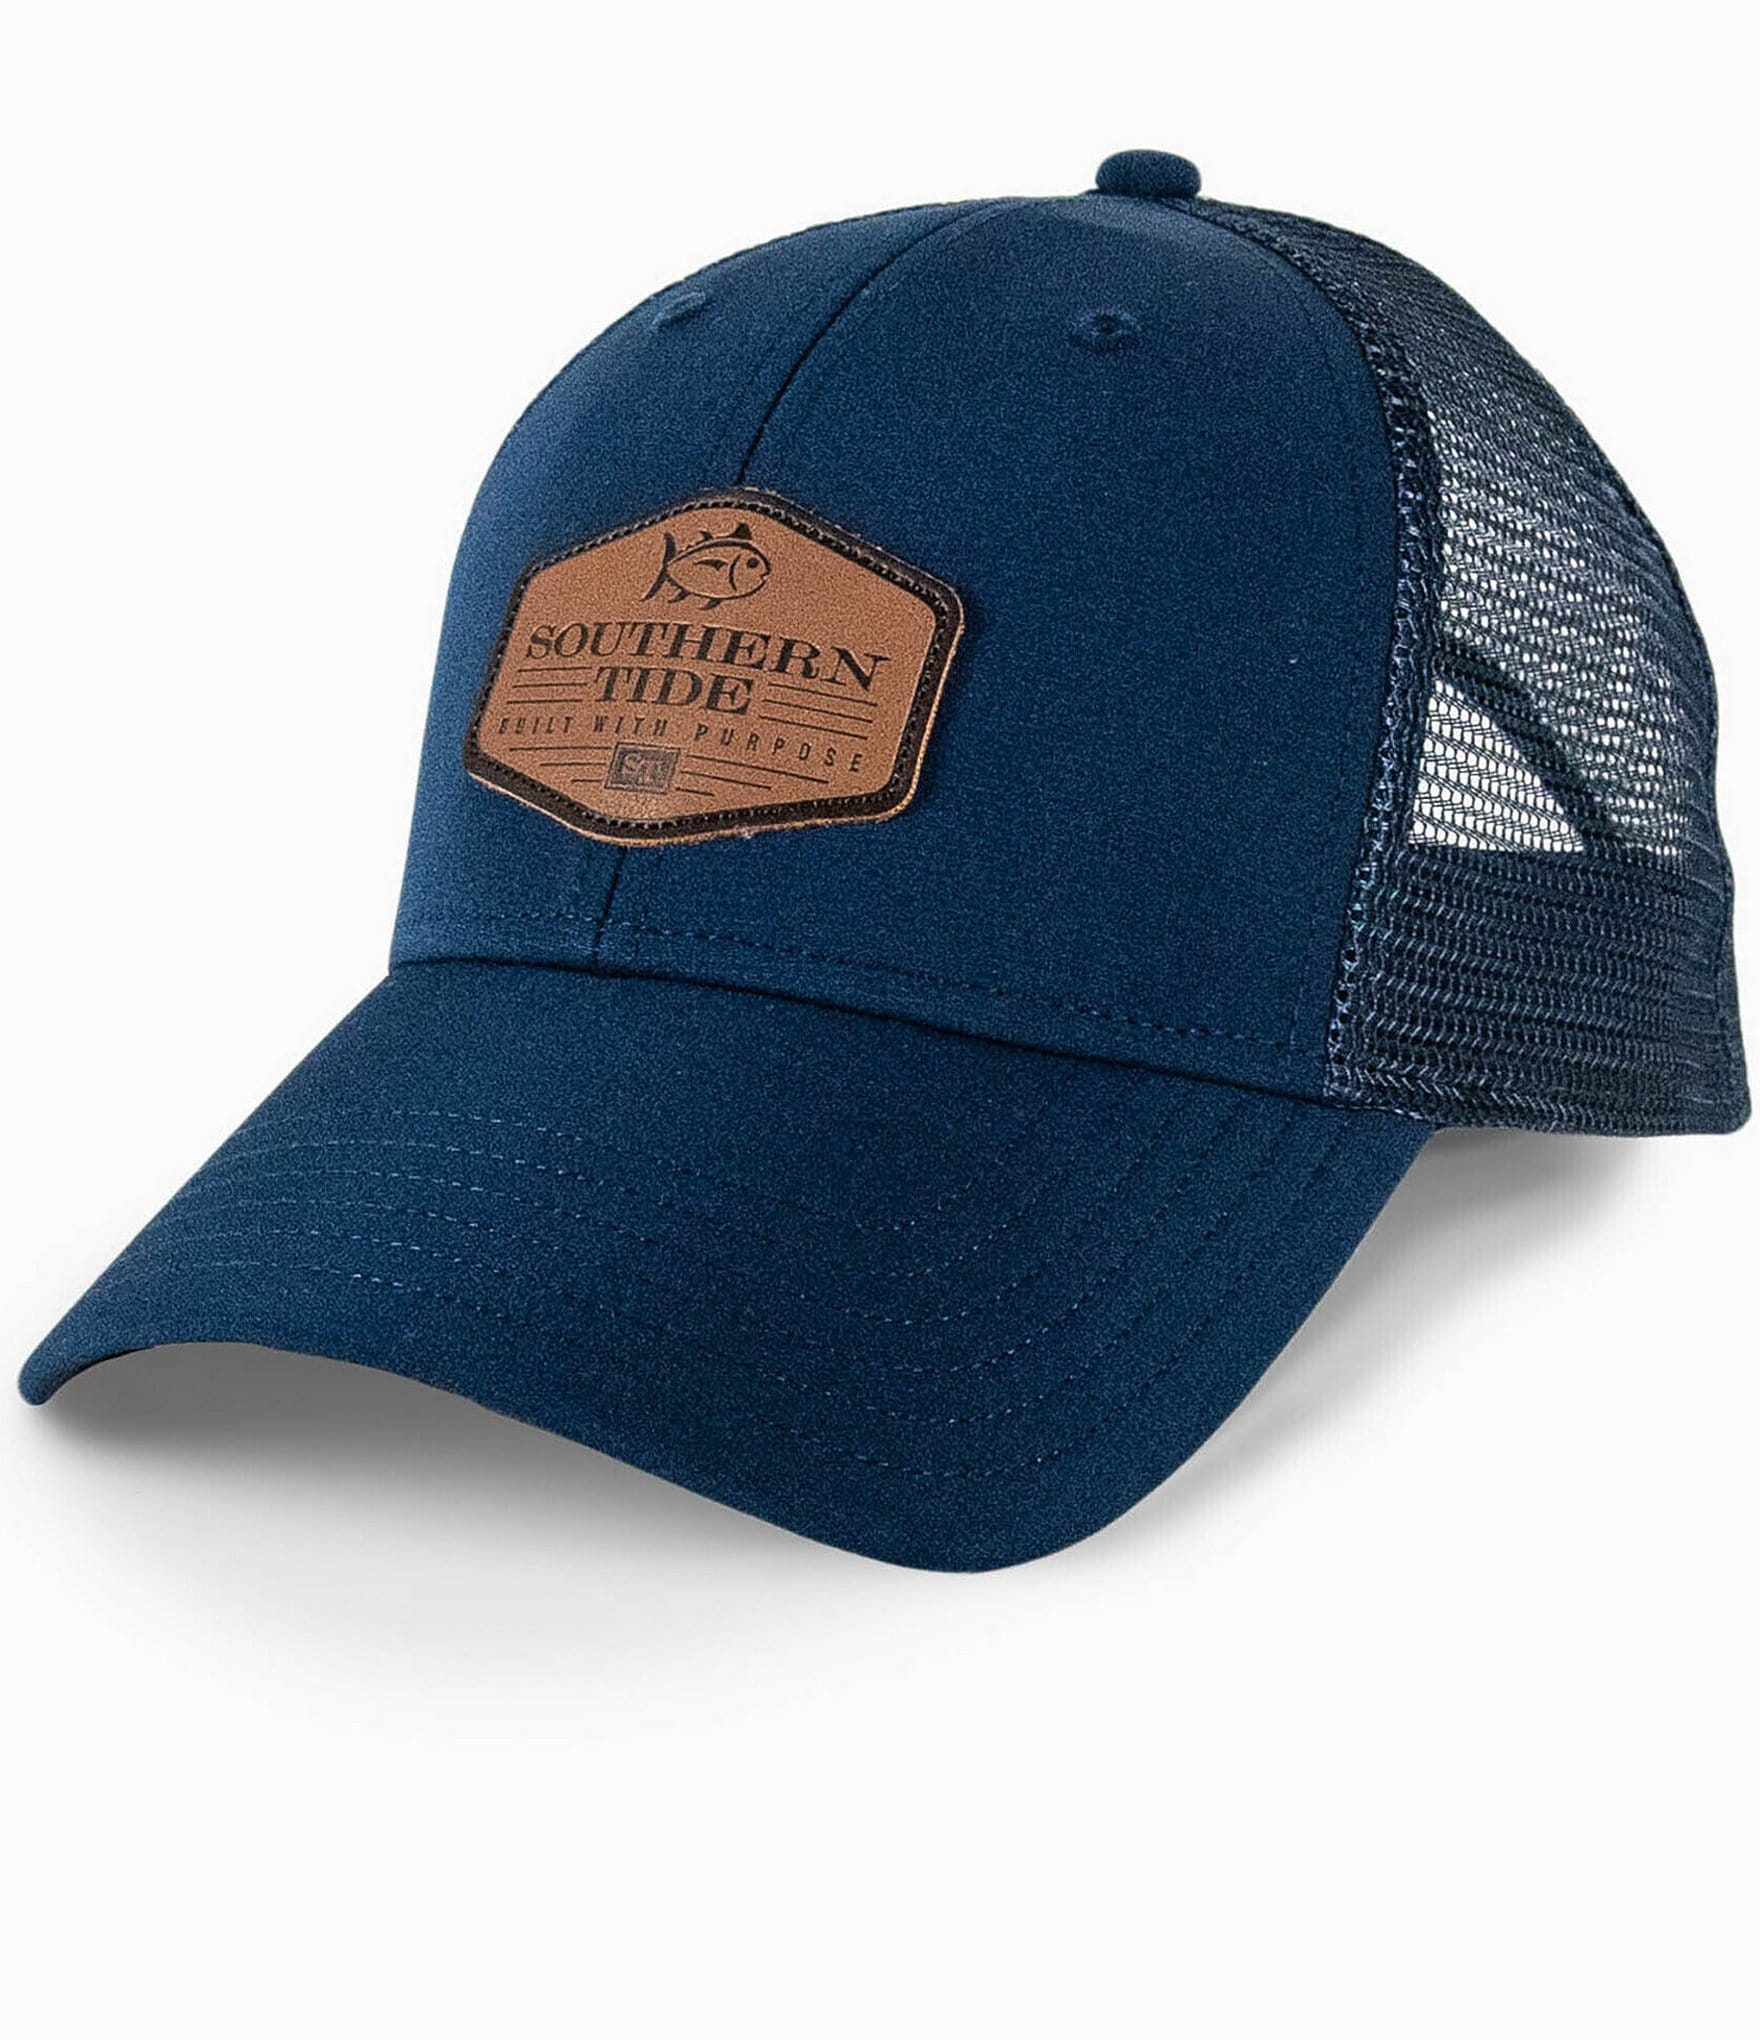 Southern Tide Built with A Purpose Trucker Hat - One Size